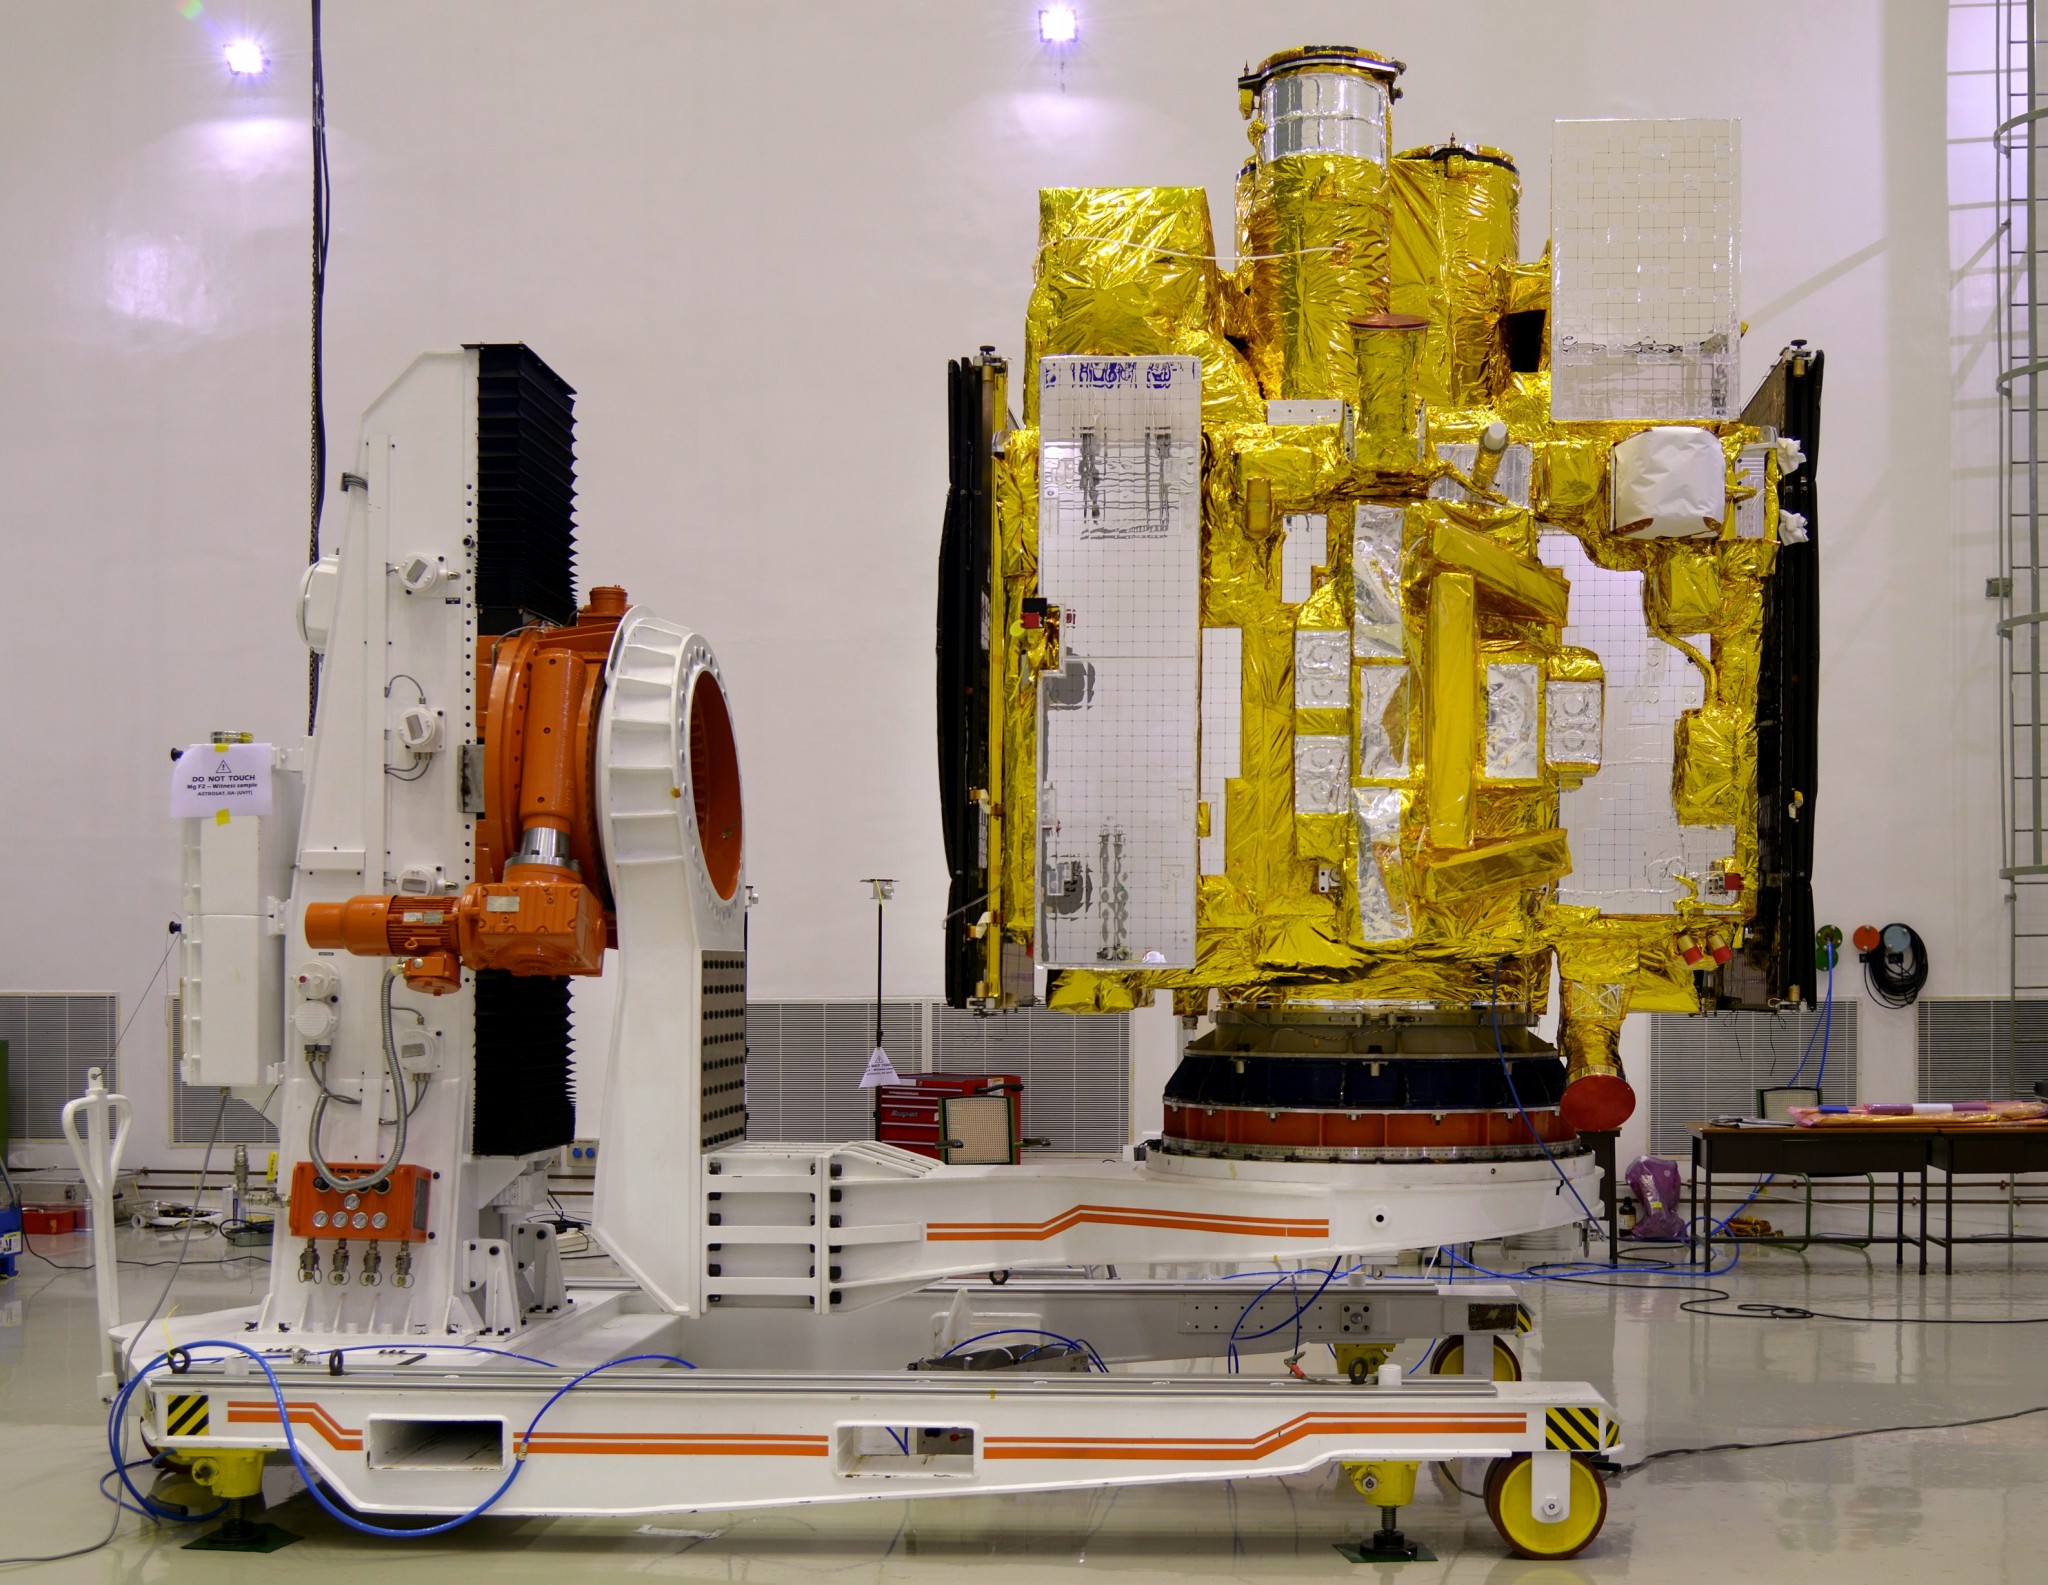 ASTROSAT in clean room before its integration with PSLV-C30